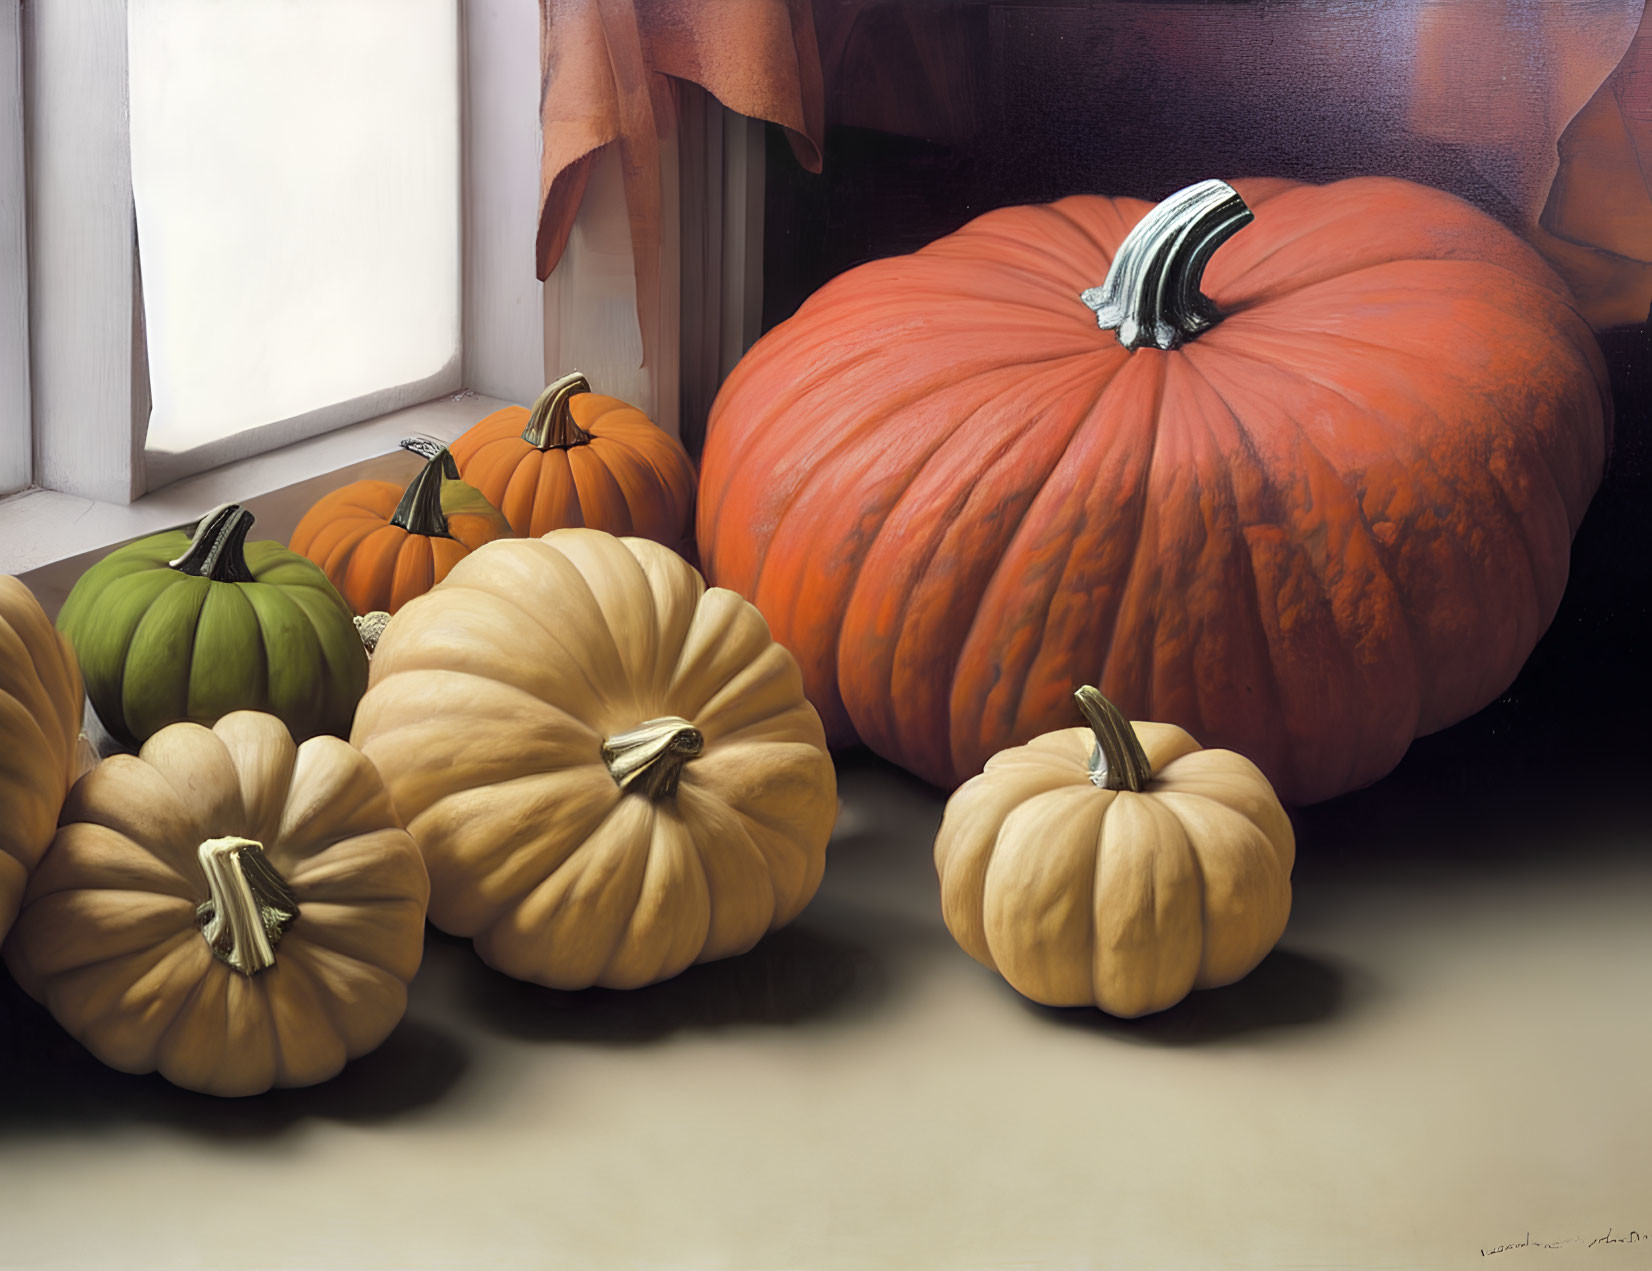 Variety of pumpkins near window with draped curtain